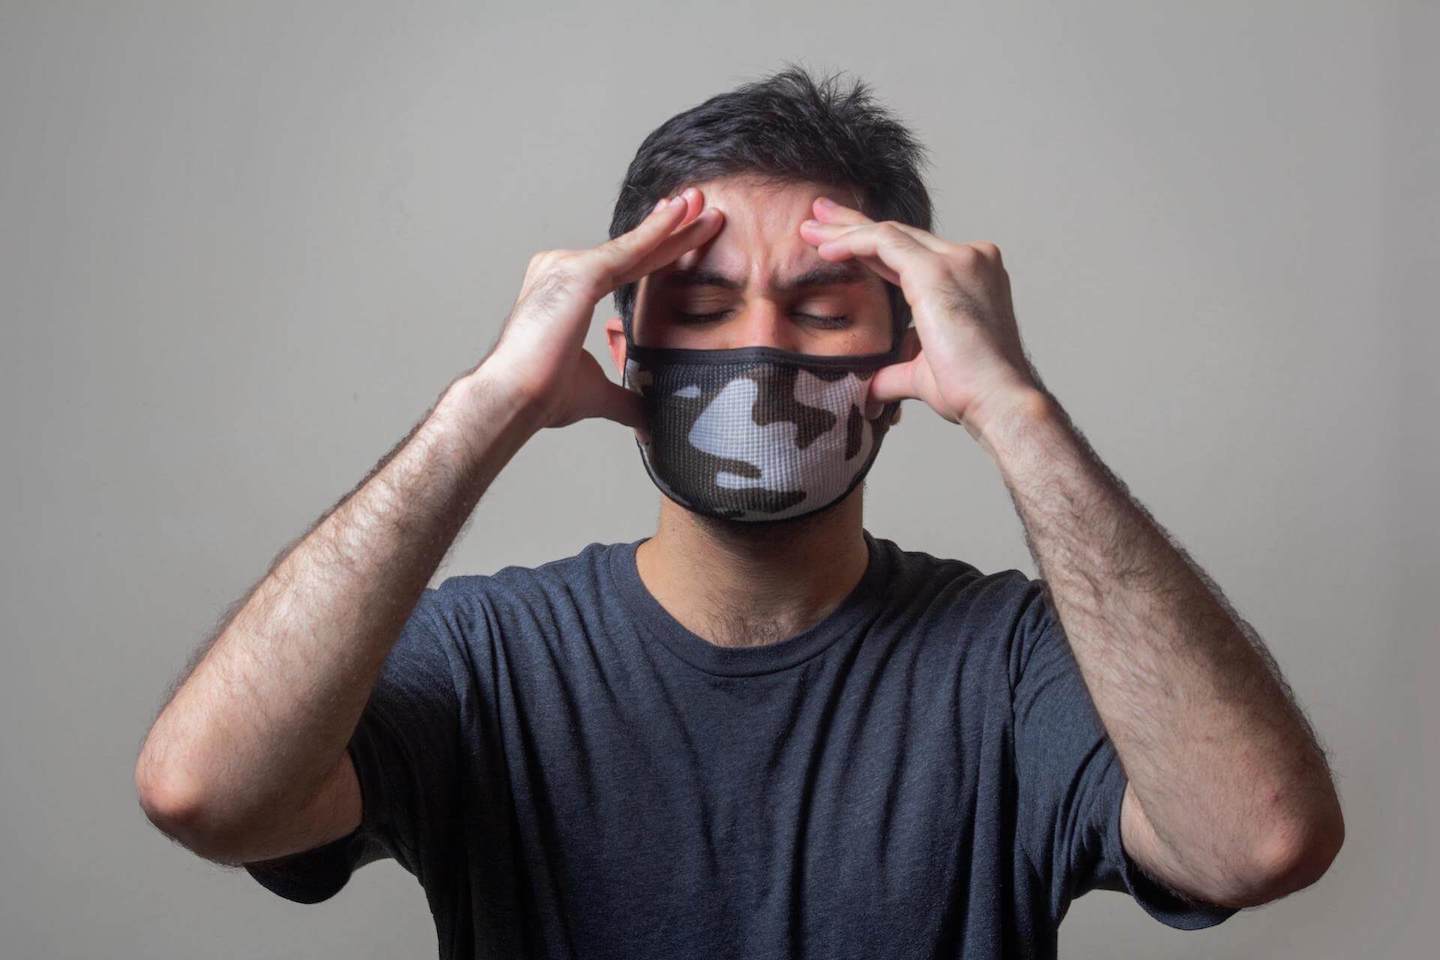 Sarkis Psychology Today image of a man wearing a face mask rubbing his temples in distress PC: Yousaf Usman usman-yousaf-Dd6St65dfYw-unsplash